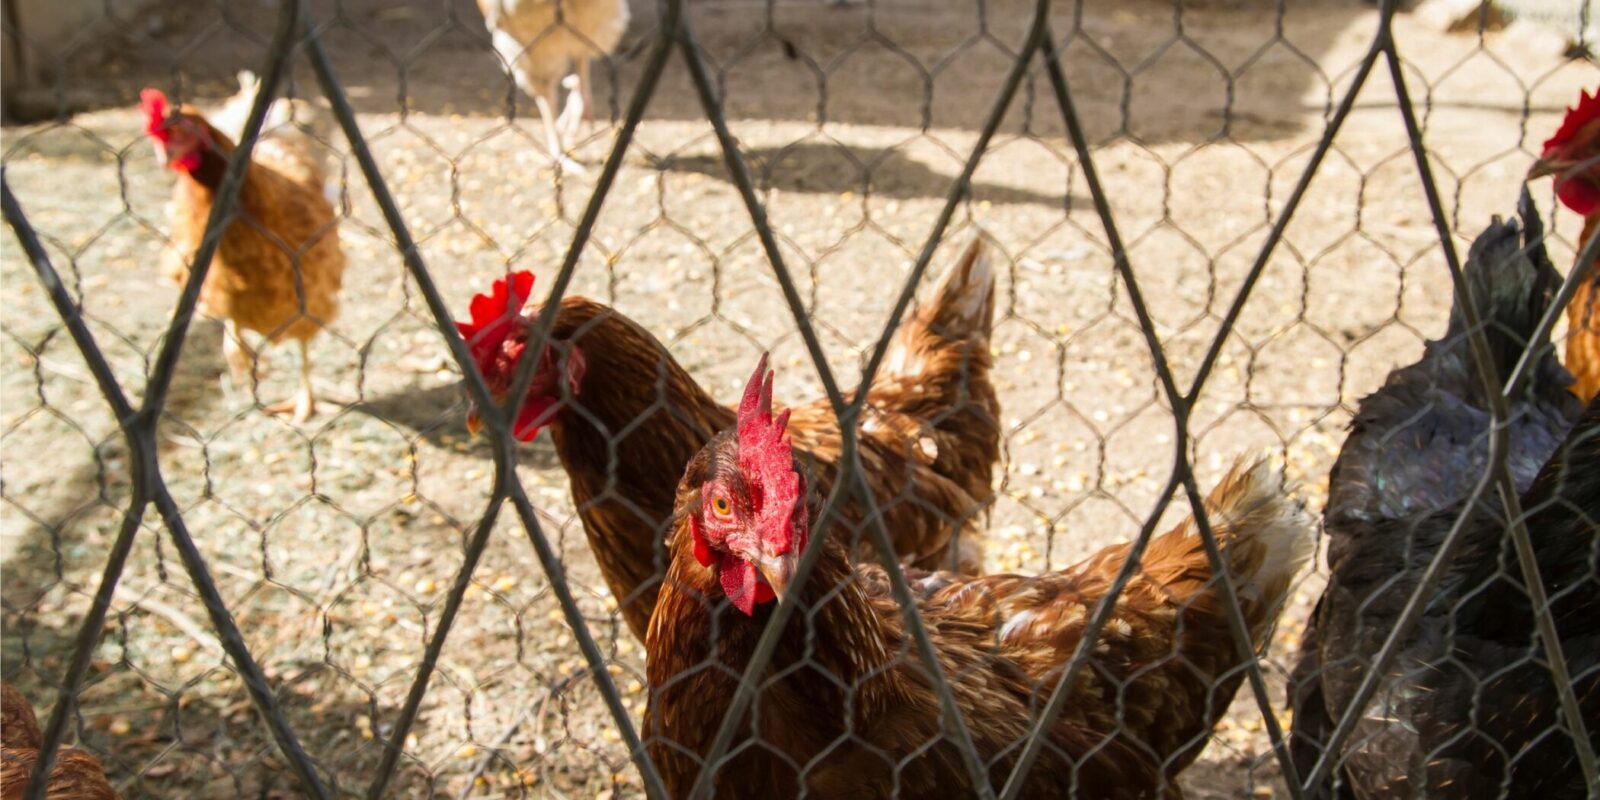 Cedar Acres Coop!  BackYard Chickens - Learn How to Raise Chickens